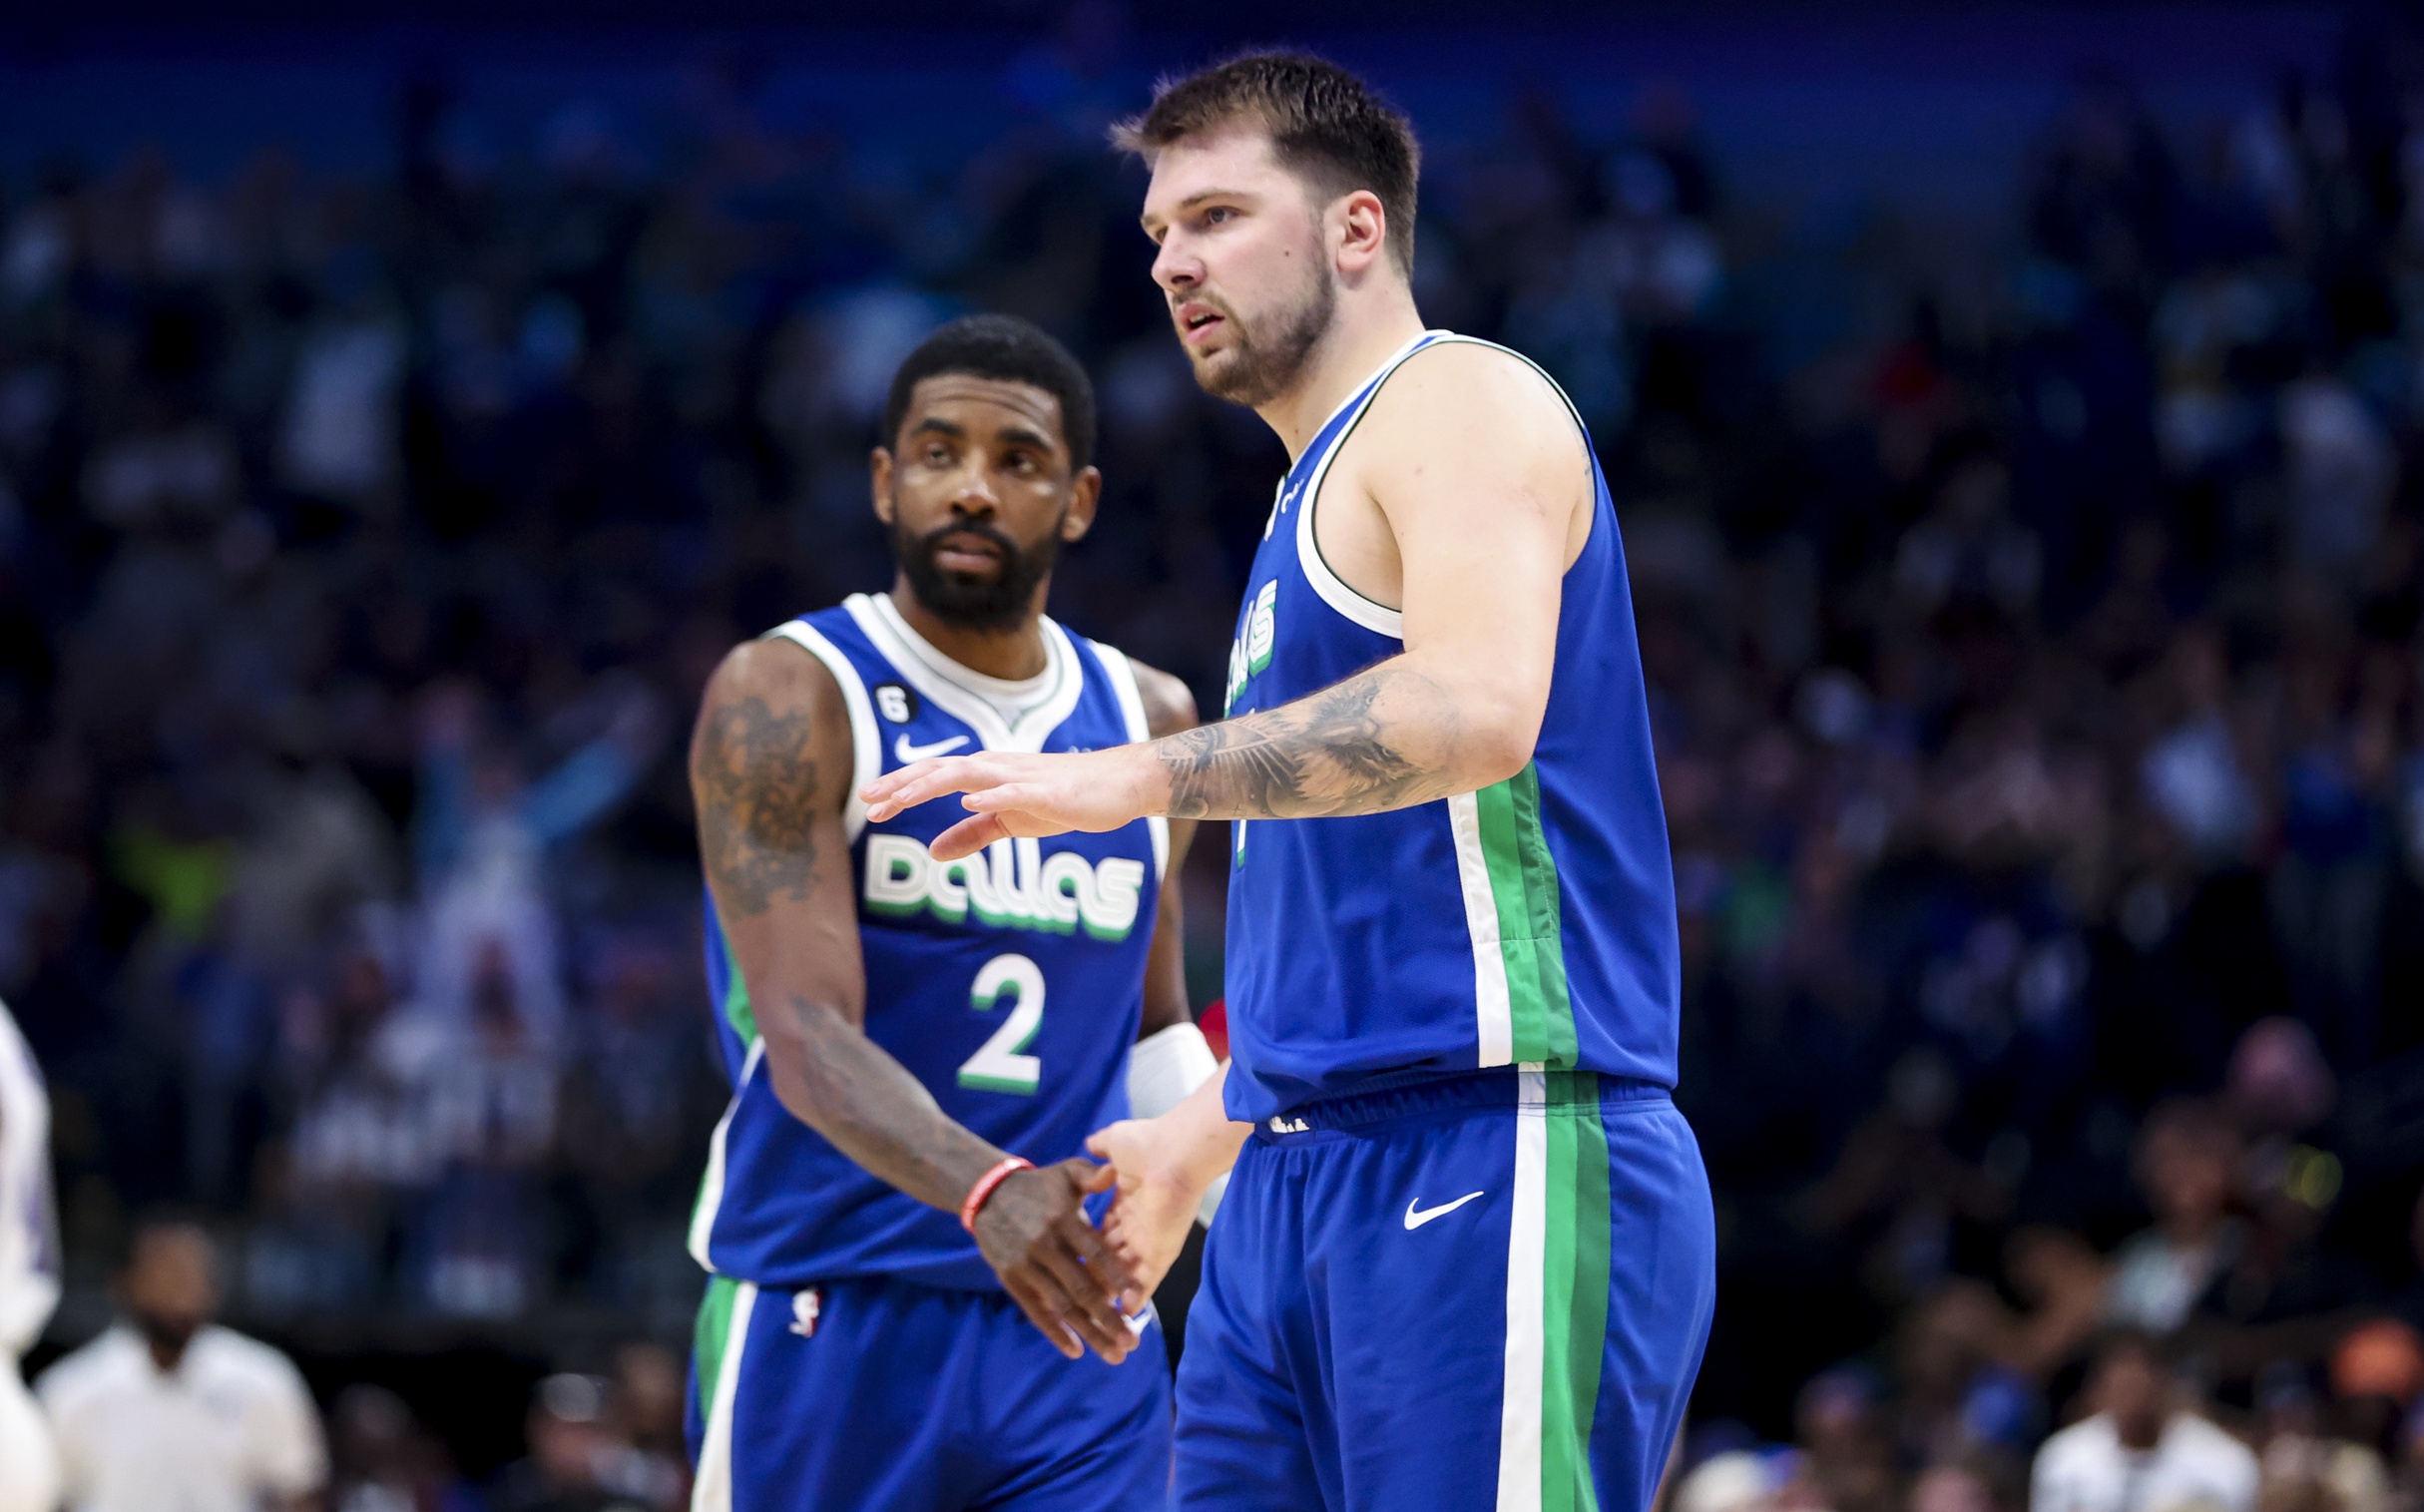 Luka Doncic and Kyrie Irving hope to coexist and help the Dallas Mavericks return to prominence